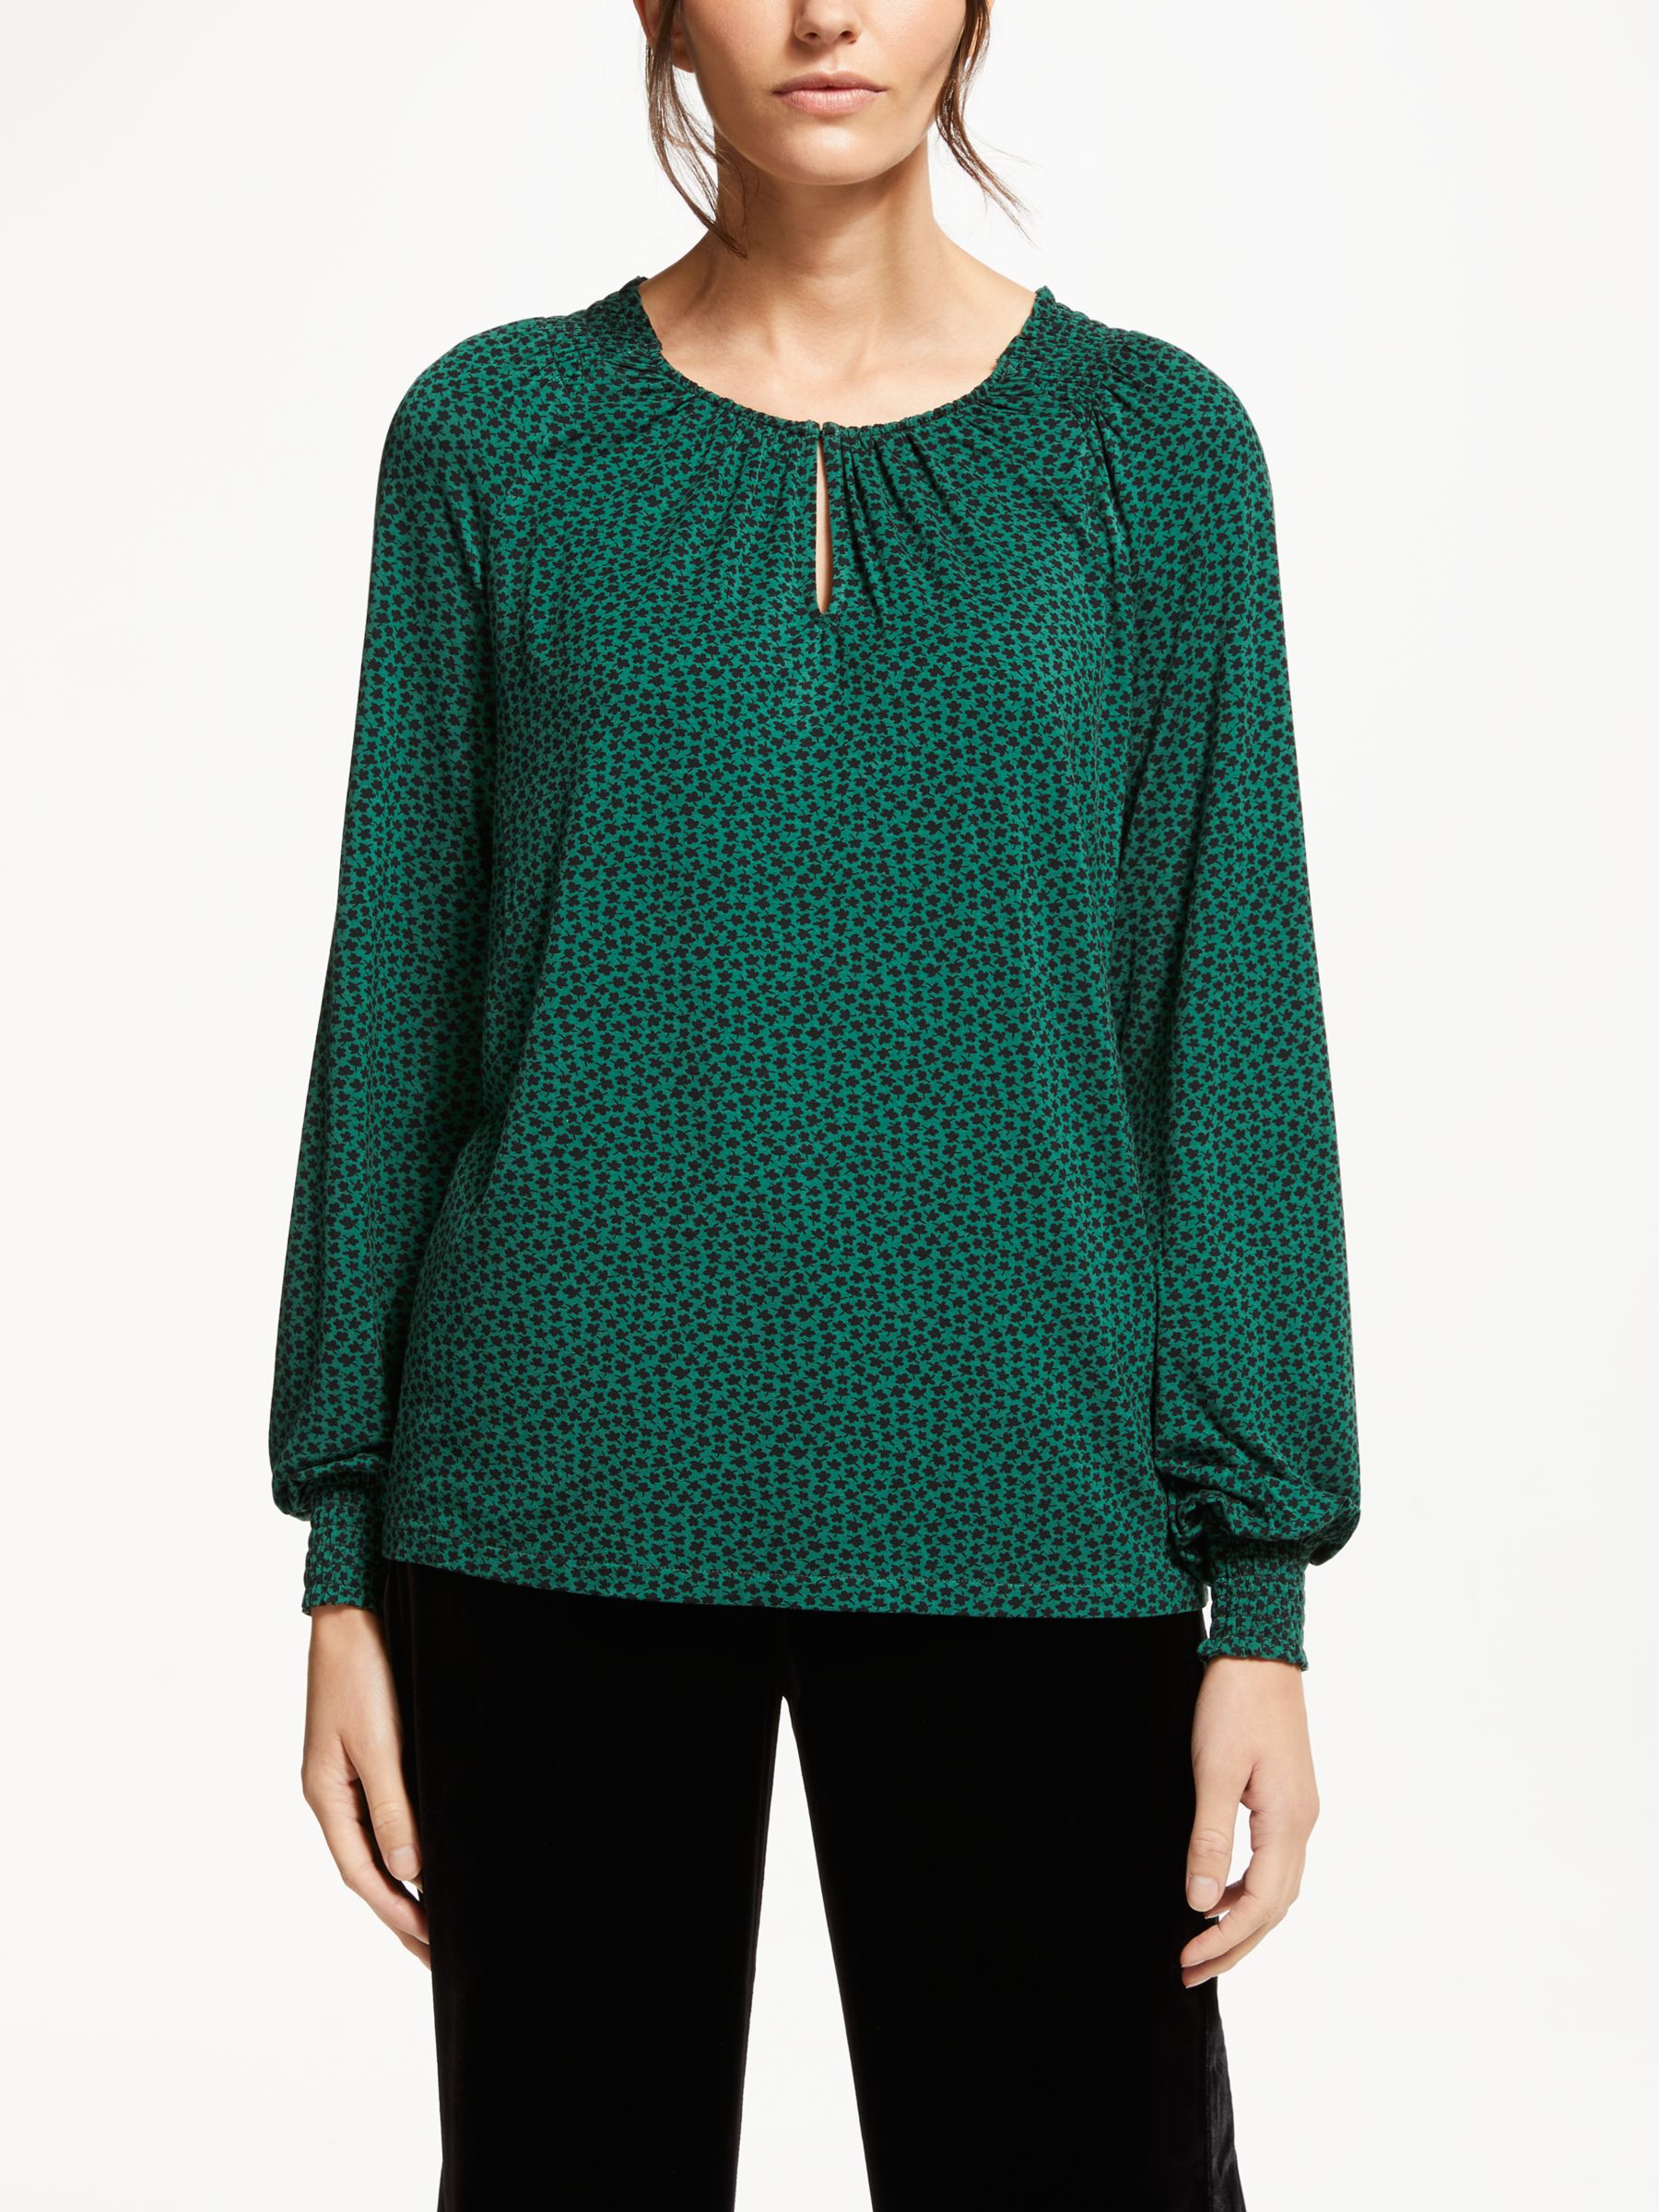 Boden Vicky Jersey Top, Amazon Green 